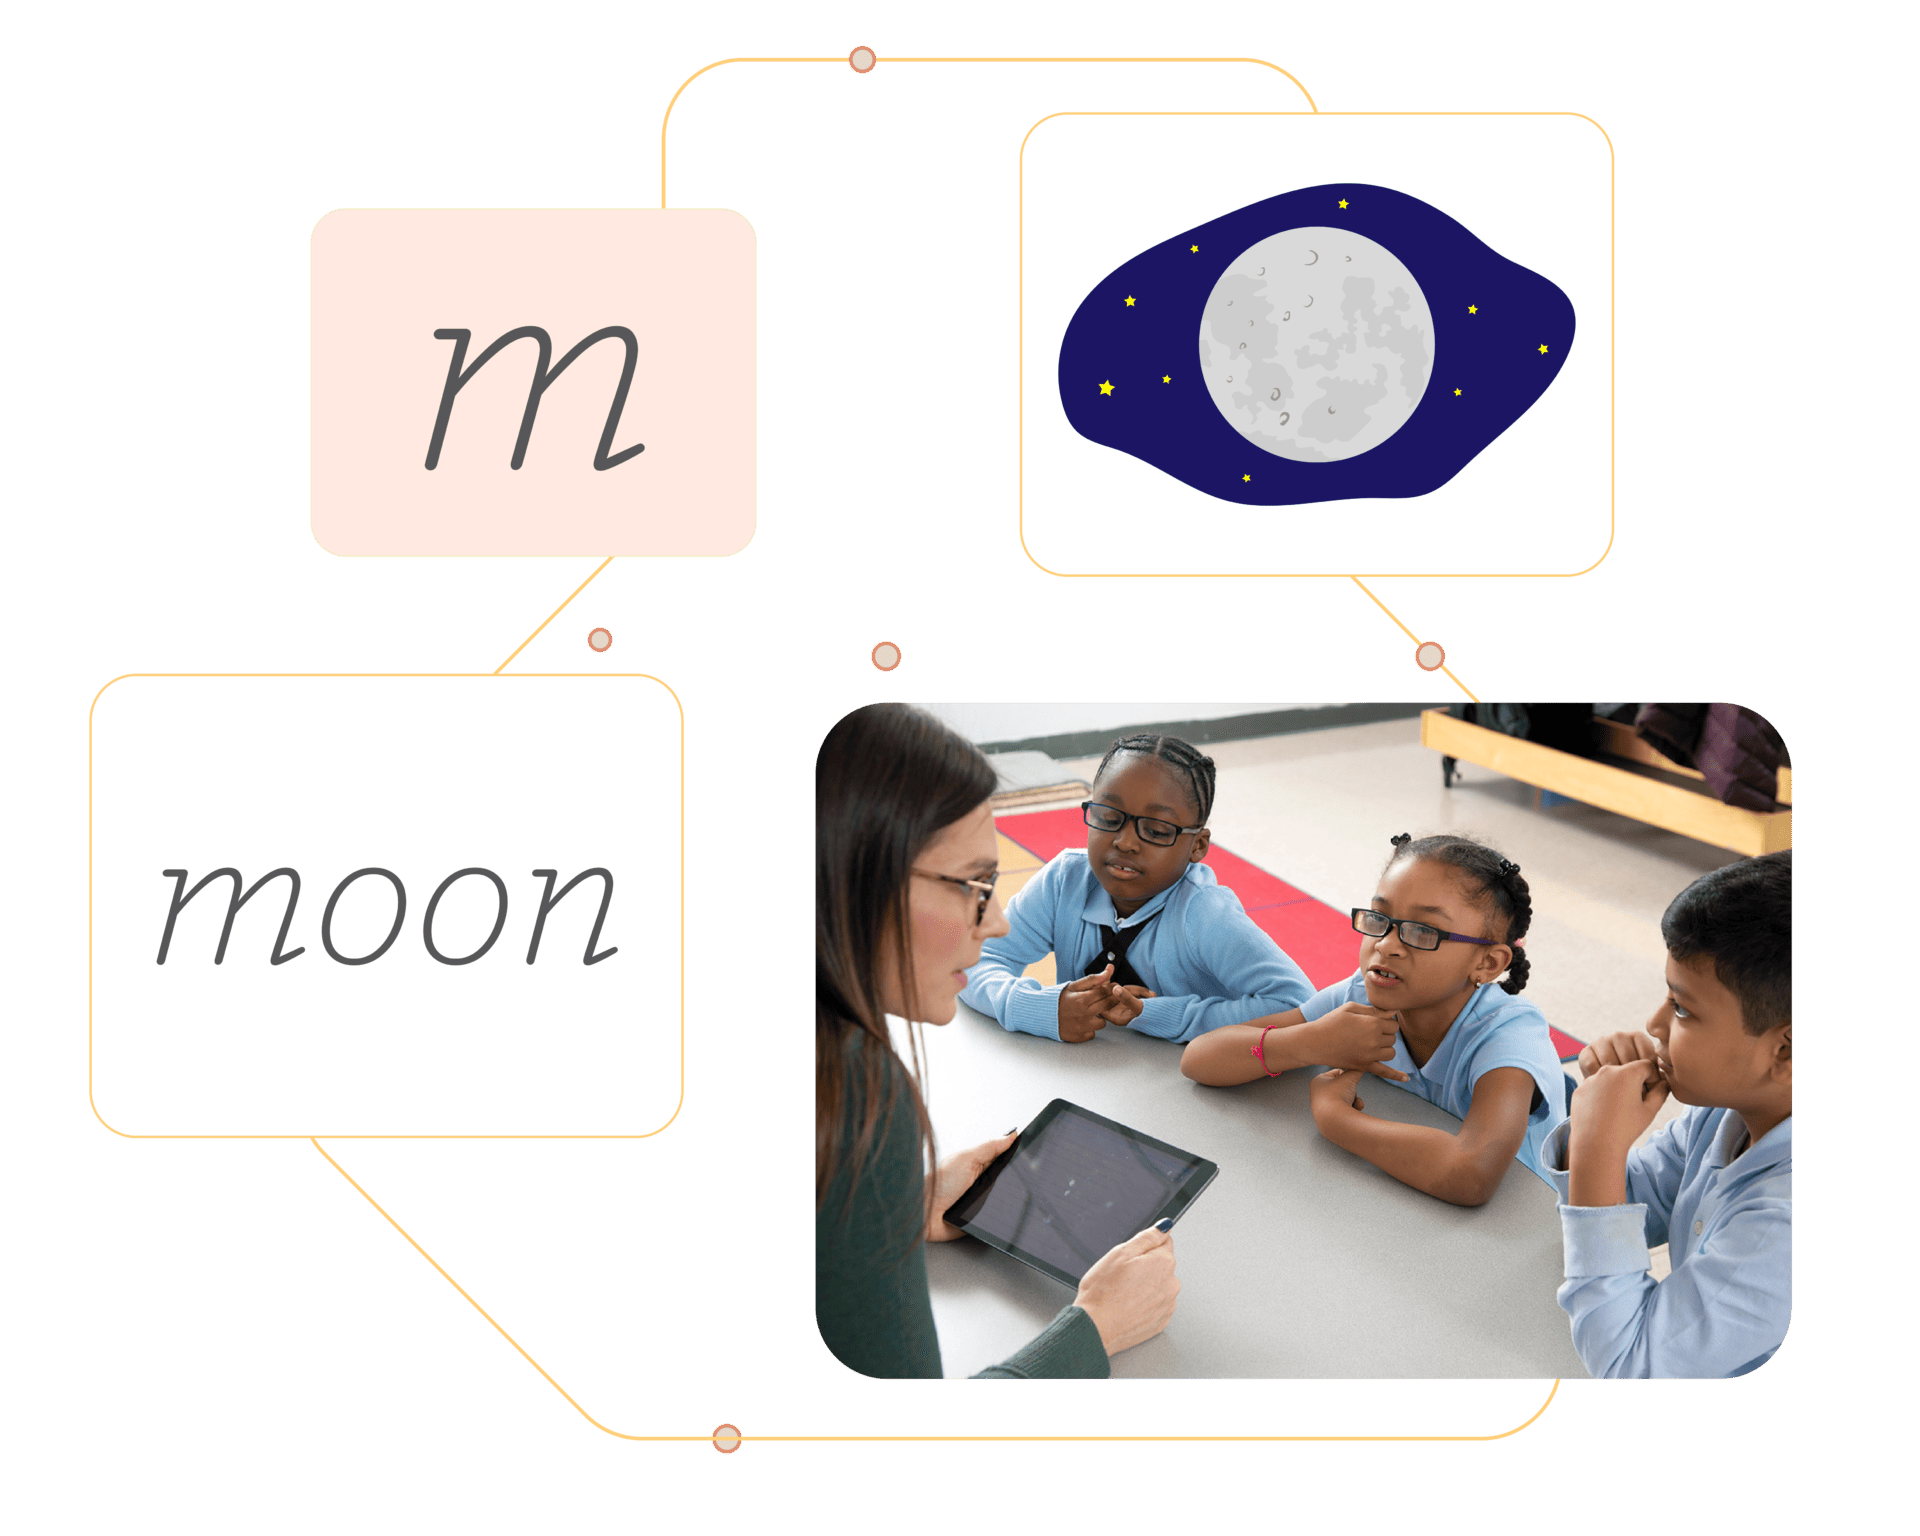 Teacher using a tablet to teach three students about the moon, linked with images of the letter 